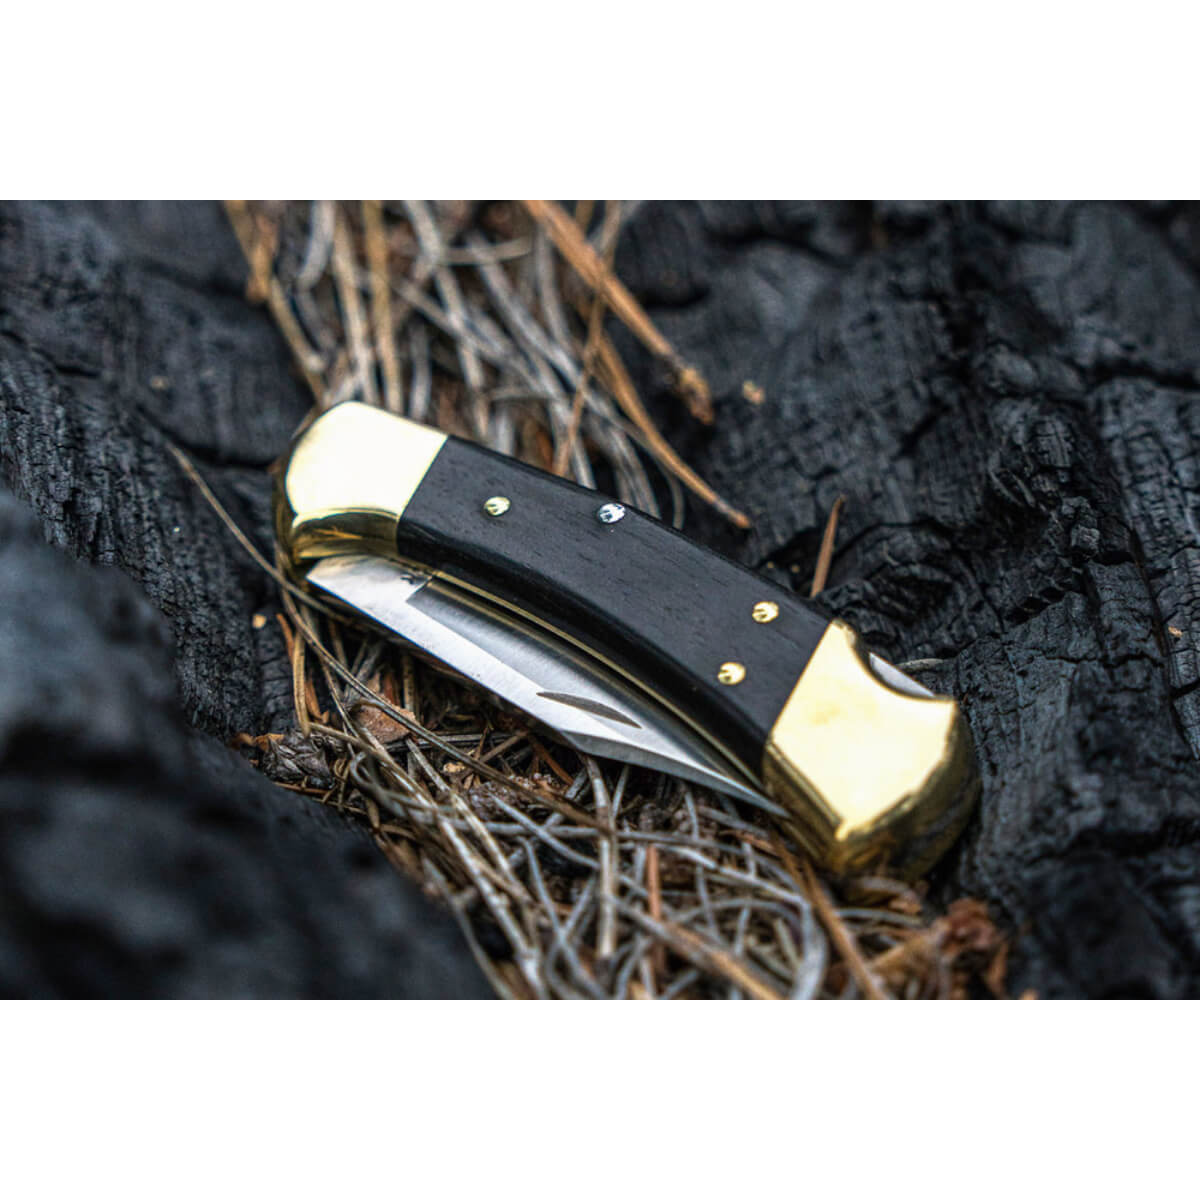 Buck 112 Ranger with Leather Sheath